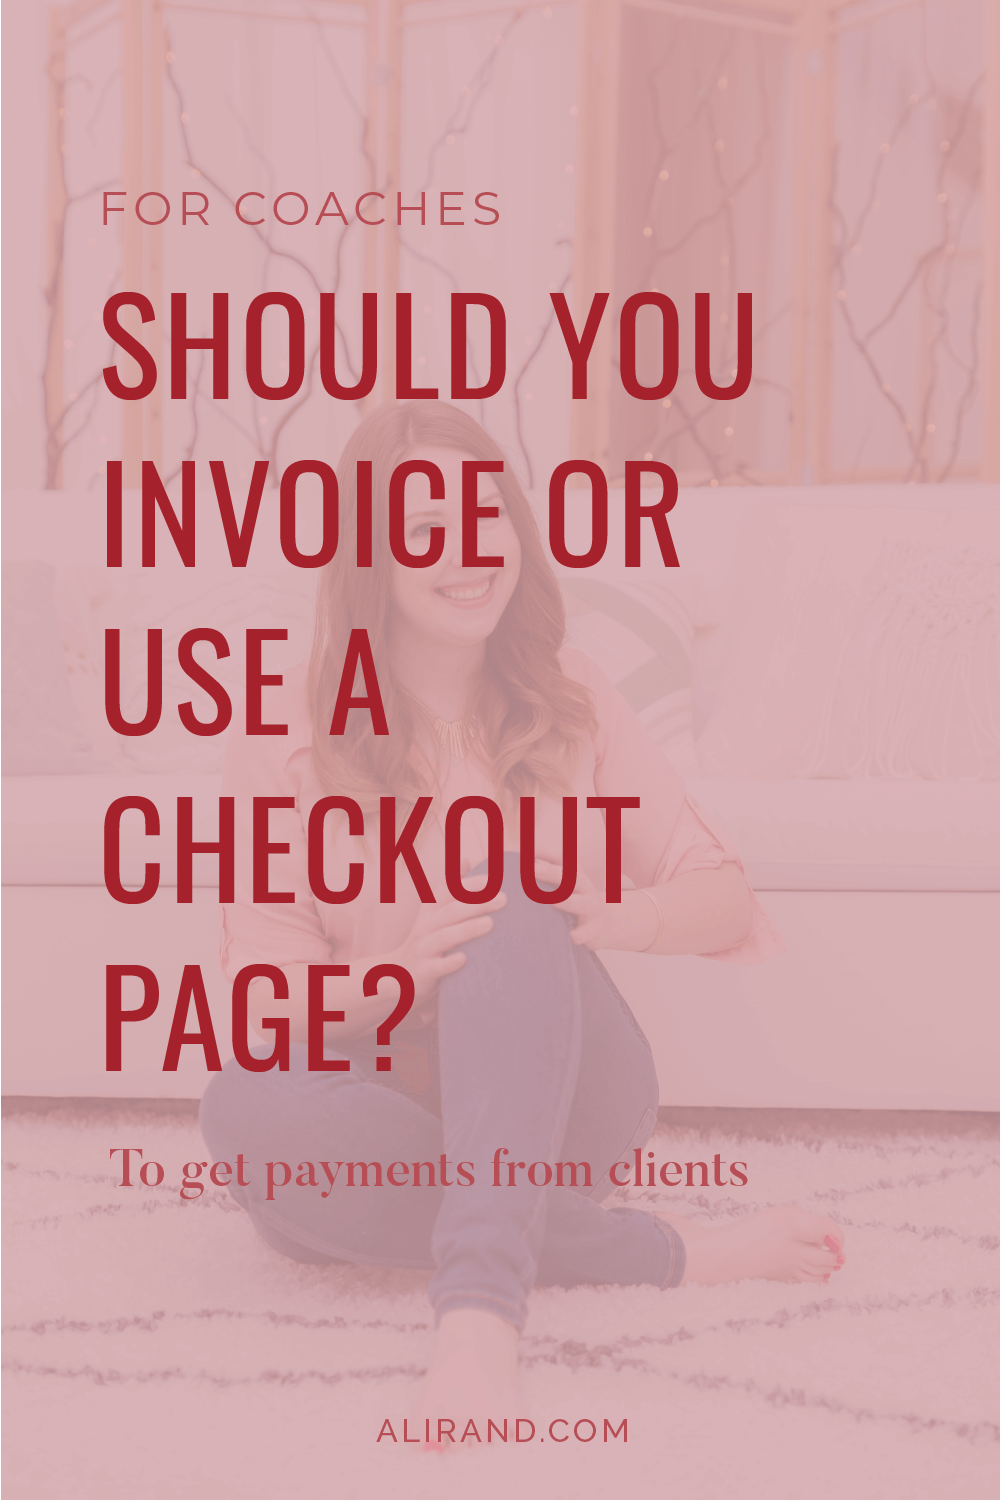 Should Coaches Invoice or use a Checkout Page